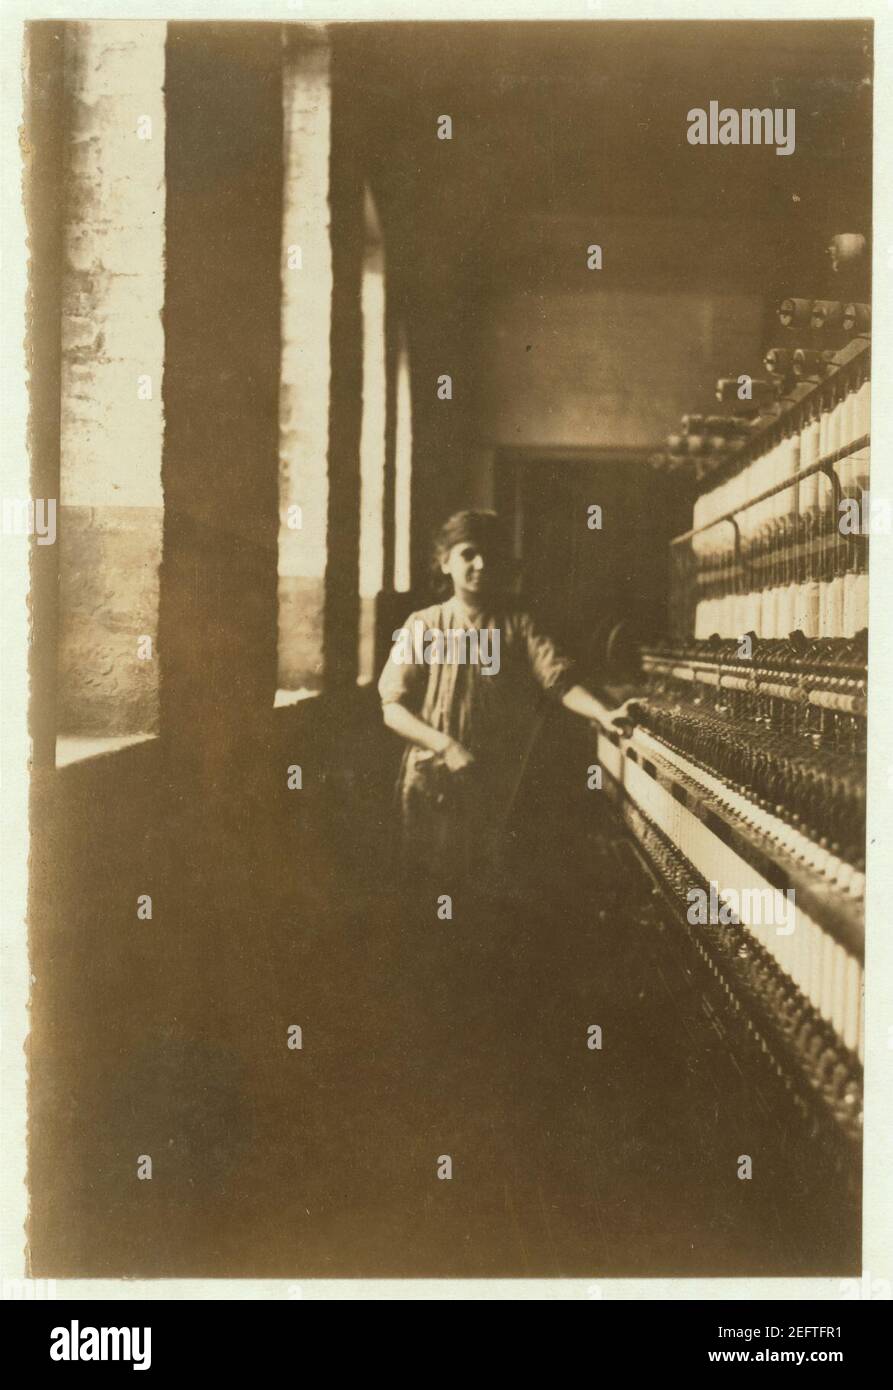 One of the little spinners in Amoskeag Mfg. Company, Manchester, N.H. She was about 48 inches high and about 11 or 12 years old. Stock Photo